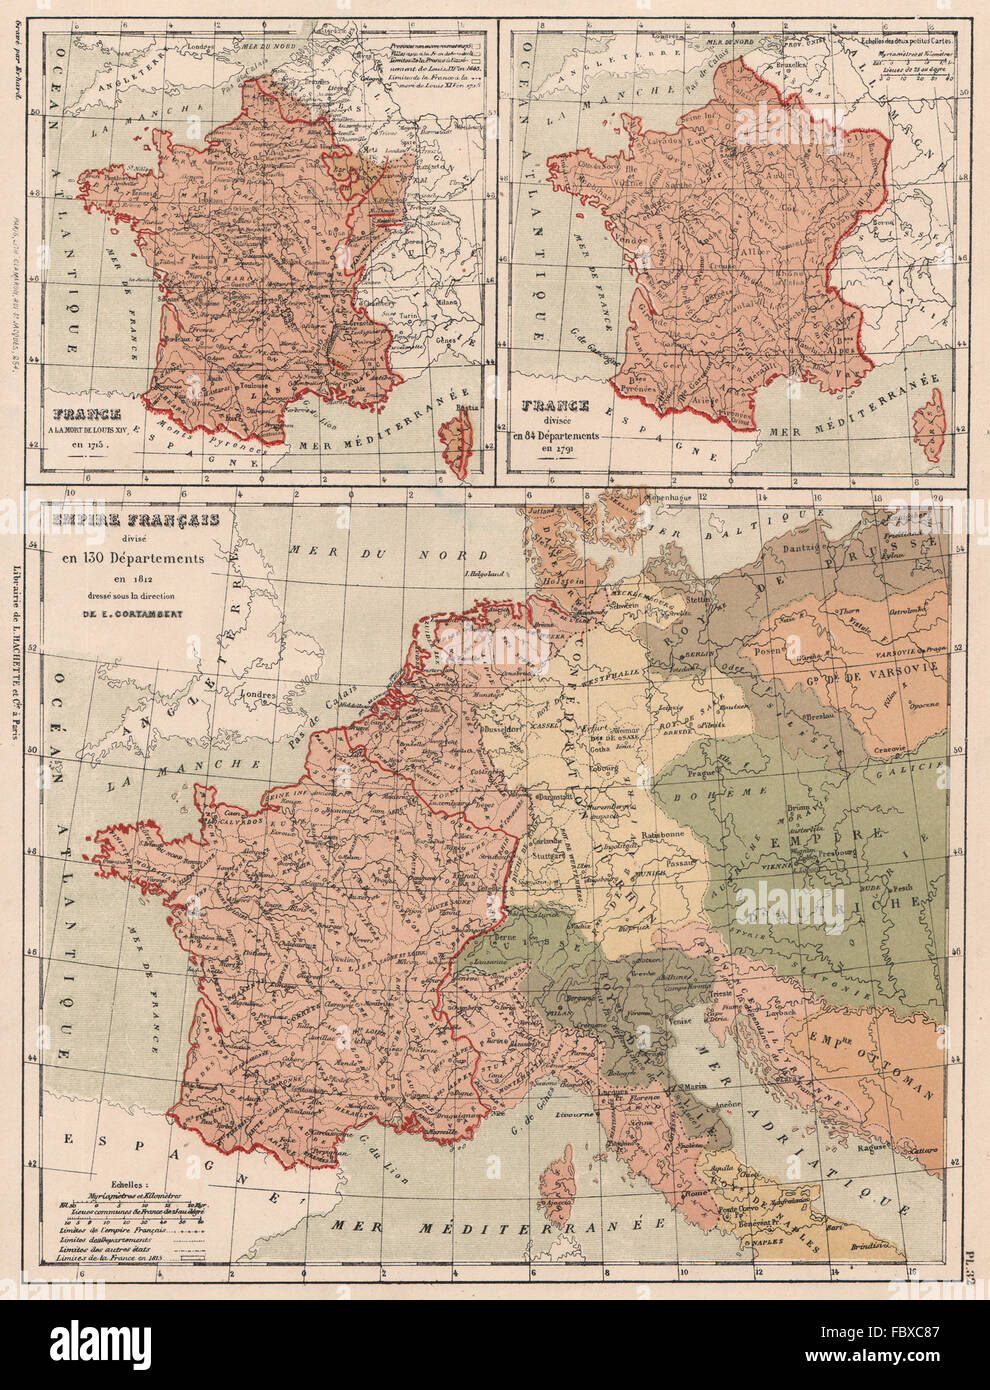 FRANCE in 1715. In 84 departments in 1791. In 130 departements in 1812, 1880 map Stock Photo